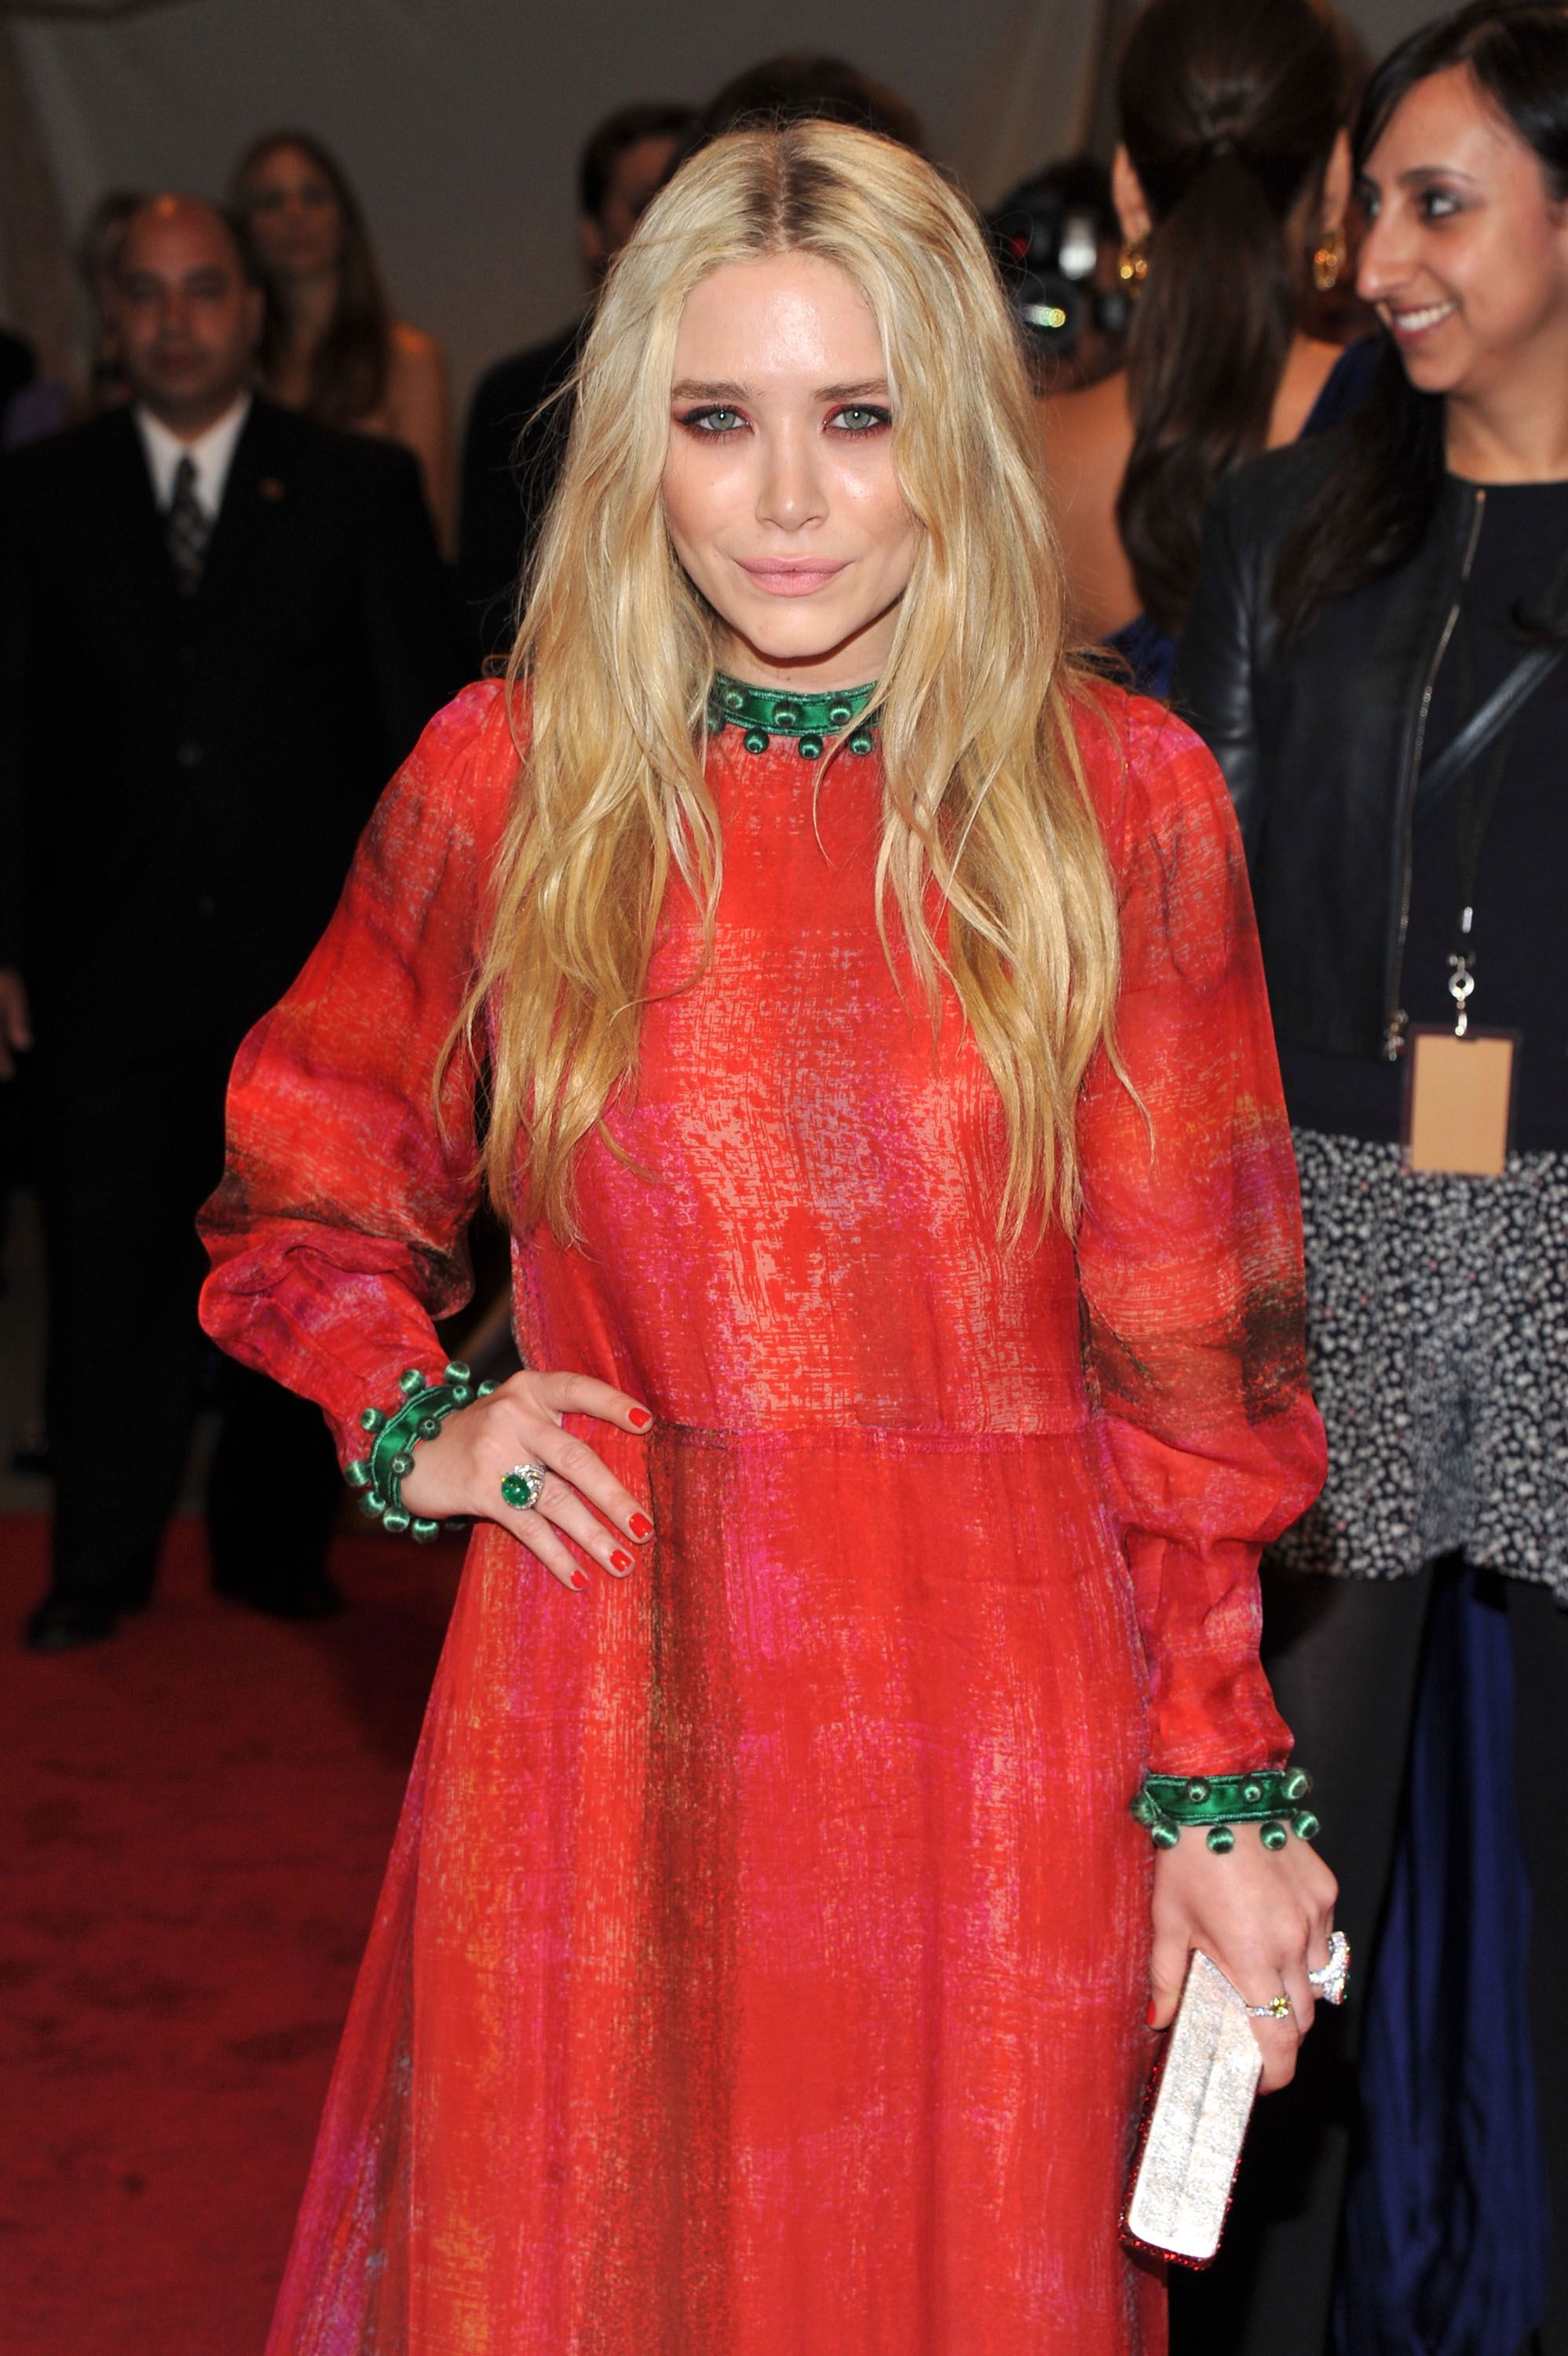 Mary-Kate Olsen during the "Alexander McQueen: Savage Beauty" Costume Institute Gala at The Metropolitan Museum of Art on May 2, 2011 in New York City. | Source: Getty Images